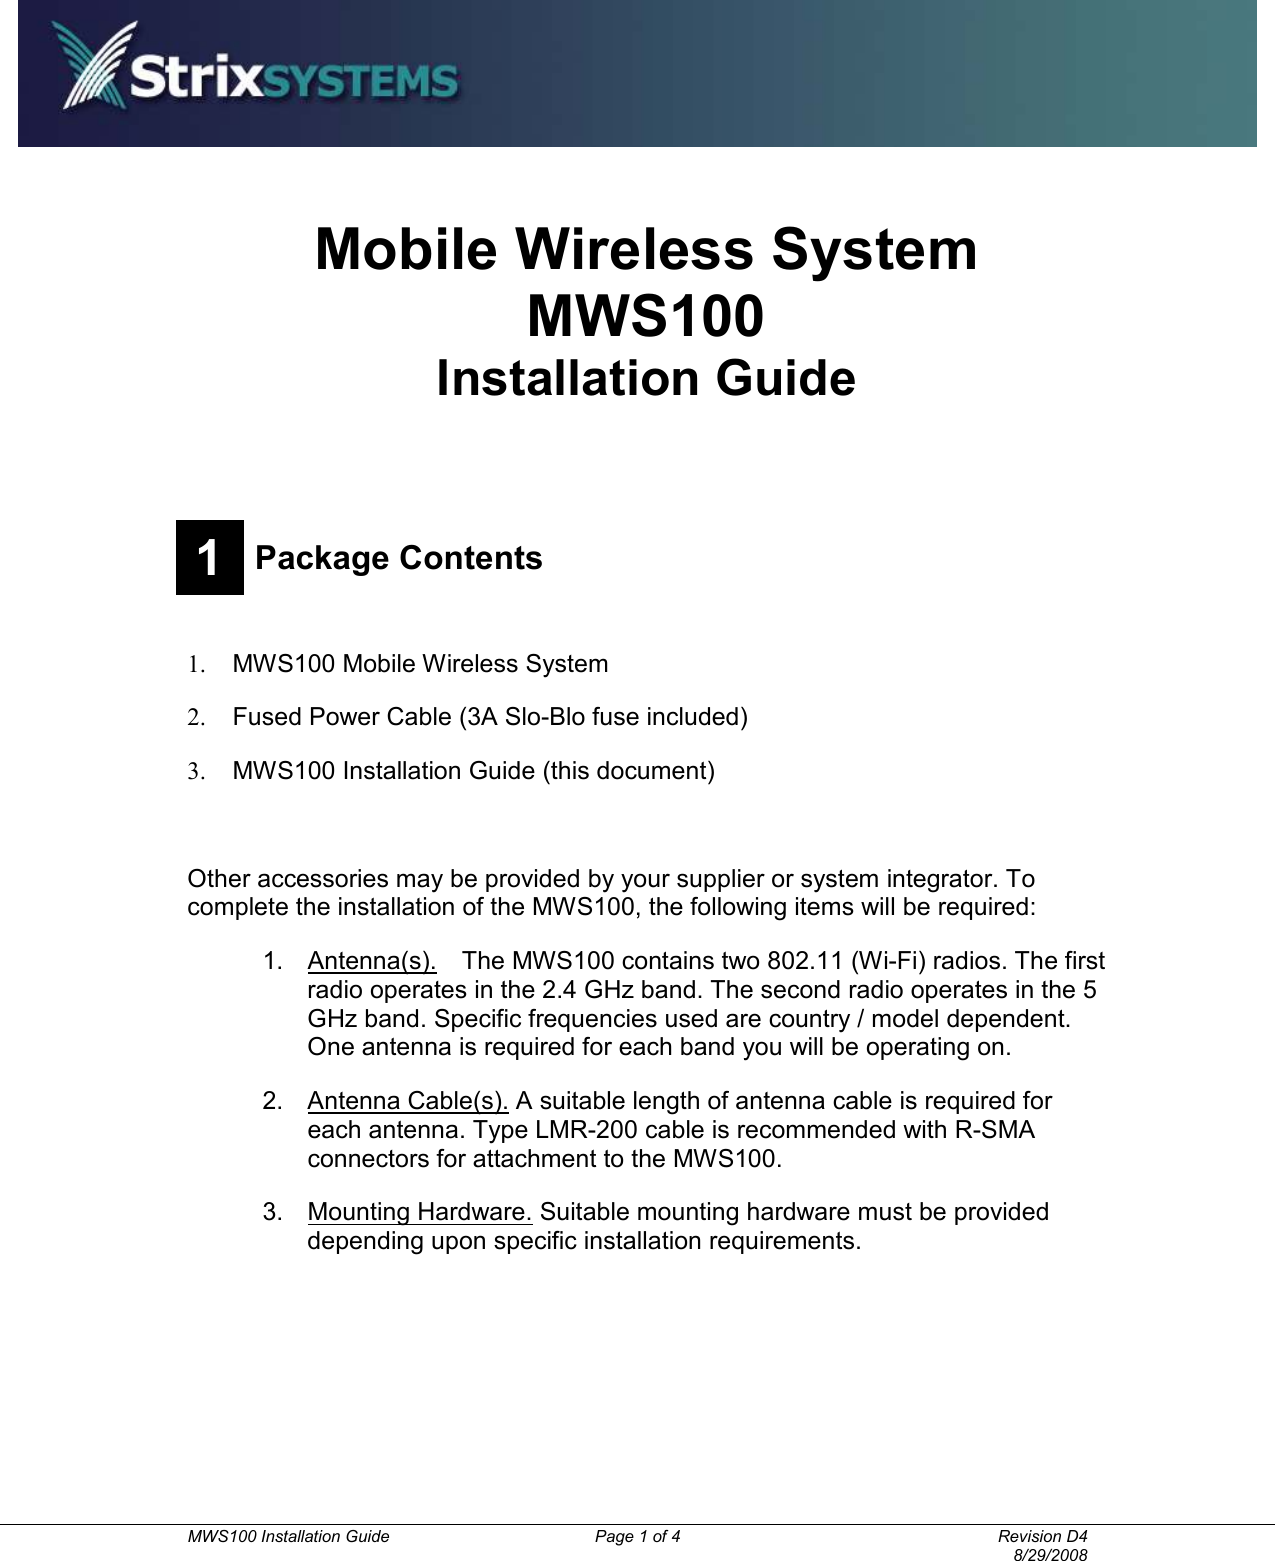          MWS100 Installation Guide  Page 1 of 4  Revision D4       8/29/2008 Mobile Wireless System MWS100 Installation Guide  1 Package Contents  1.  MWS100 Mobile Wireless System 2.  Fused Power Cable (3A Slo-Blo fuse included) 3.  MWS100 Installation Guide (this document)    Other accessories may be provided by your supplier or system integrator. To complete the installation of the MWS100, the following items will be required: 1.  Antenna(s).    The MWS100 contains two 802.11 (Wi-Fi) radios. The first radio operates in the 2.4 GHz band. The second radio operates in the 5 GHz band. Specific frequencies used are country / model dependent. One antenna is required for each band you will be operating on. 2.  Antenna Cable(s). A suitable length of antenna cable is required for each antenna. Type LMR-200 cable is recommended with R-SMA connectors for attachment to the MWS100. 3.  Mounting Hardware. Suitable mounting hardware must be provided depending upon specific installation requirements. 